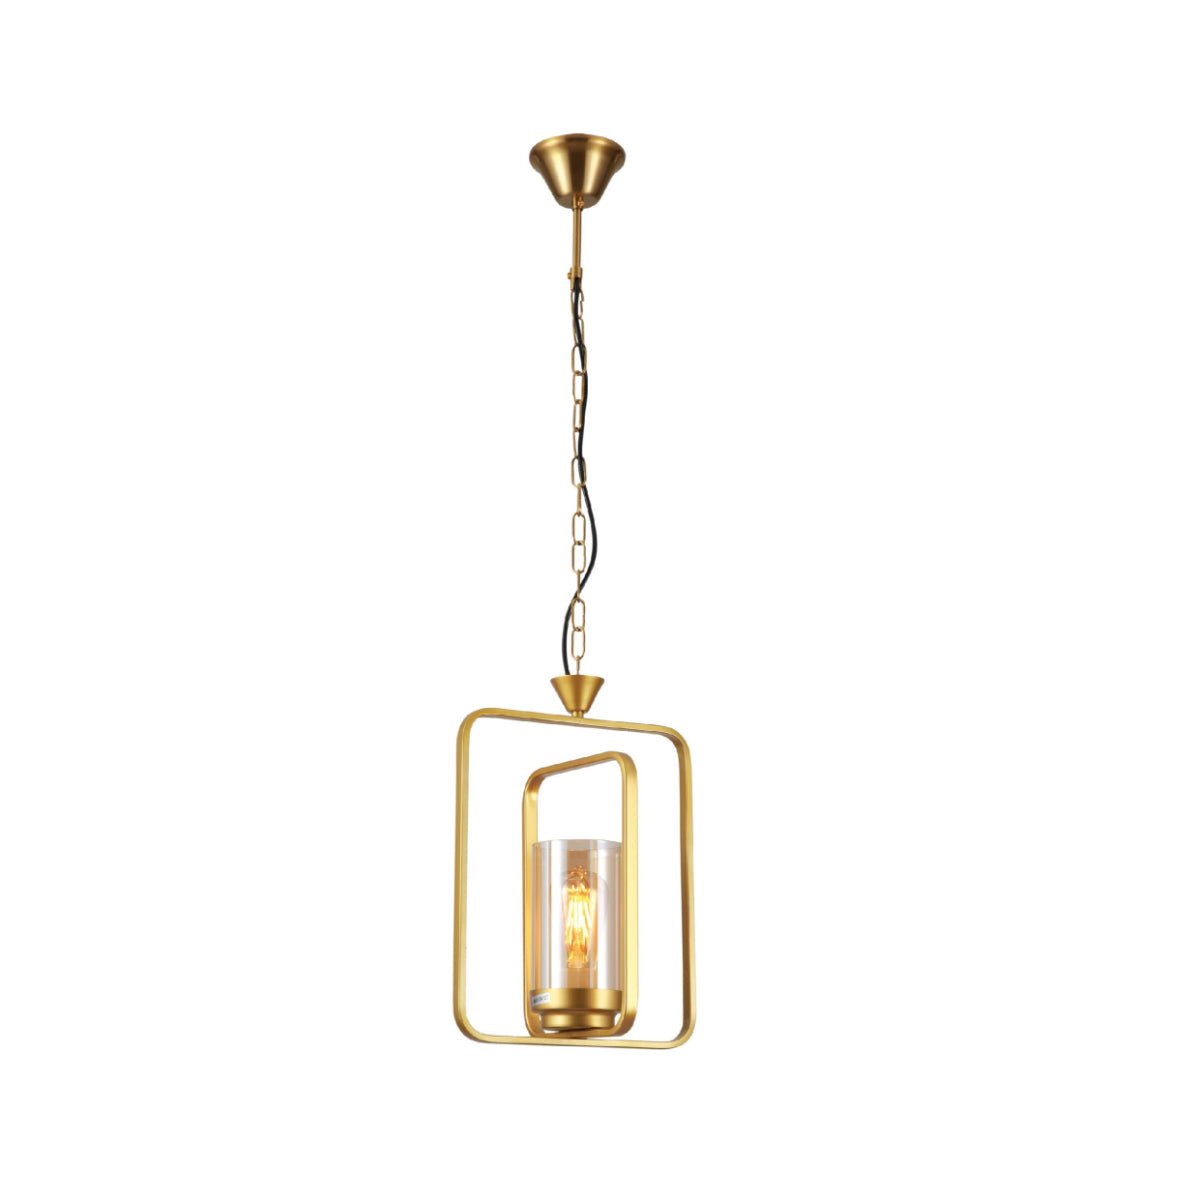 Main image of Gold Metal Cage Body Amber Cylinder Glass Pendant Ceiling Light with E27 Fitting | TEKLED 159-17438